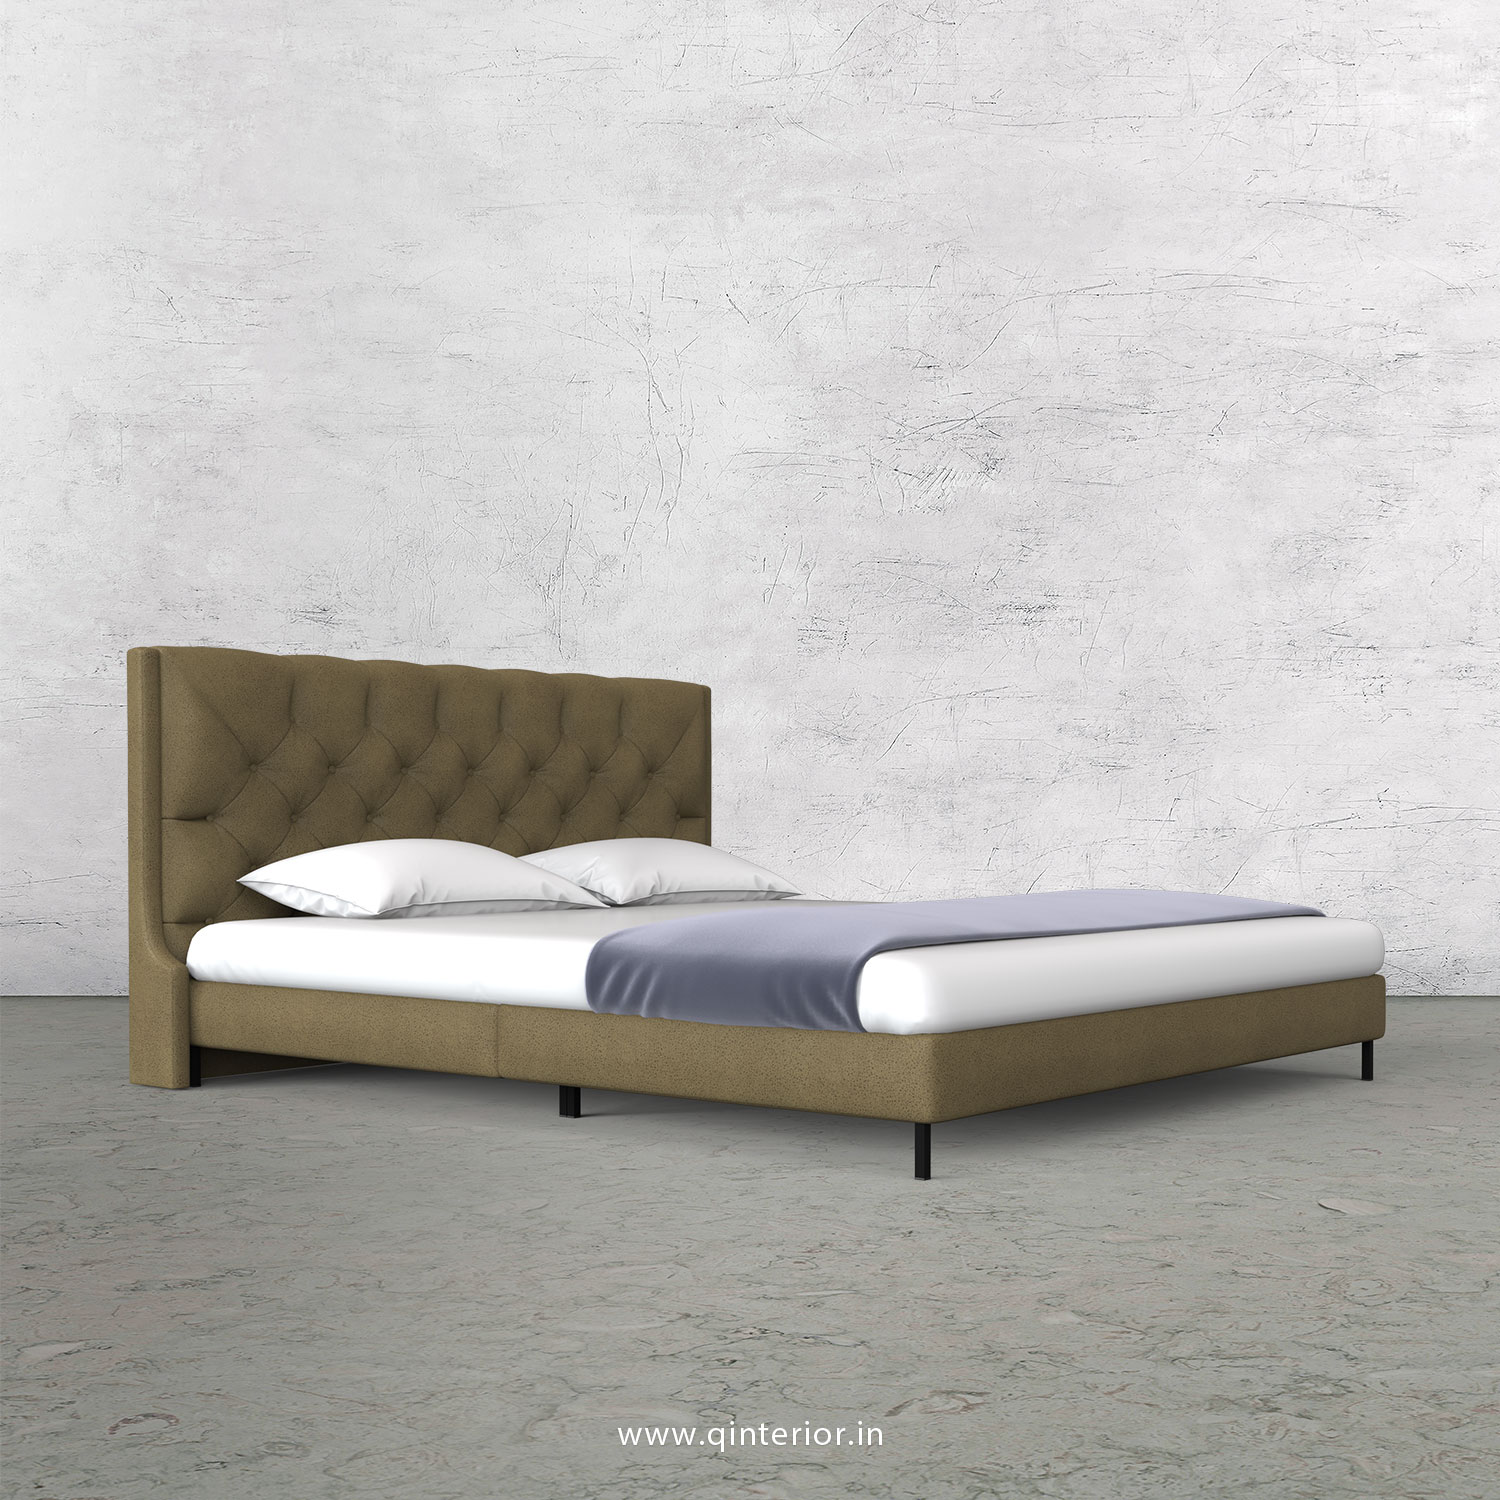 Scorpius Queen Size Bed with Fab Leather Fabric - QBD003 FL01